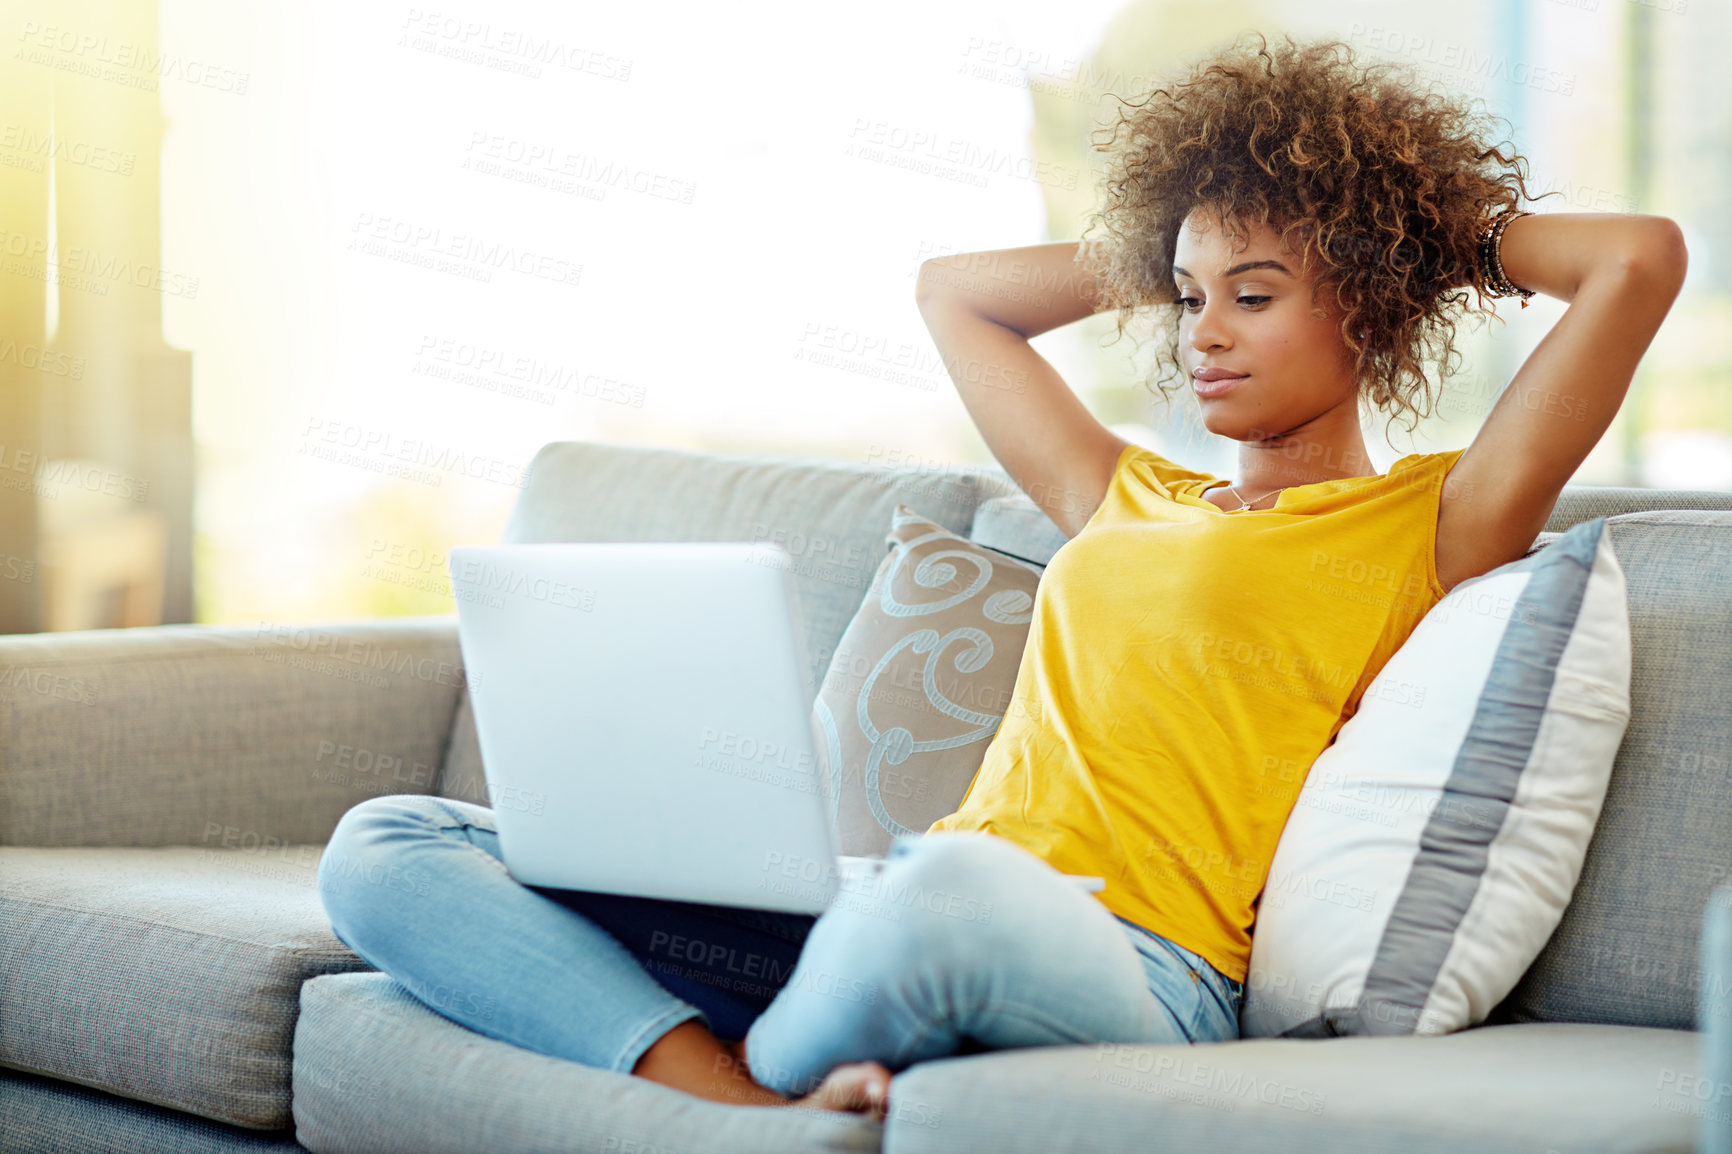 Buy stock photo Shot of a young woman using a laptop on a relaxing day at home